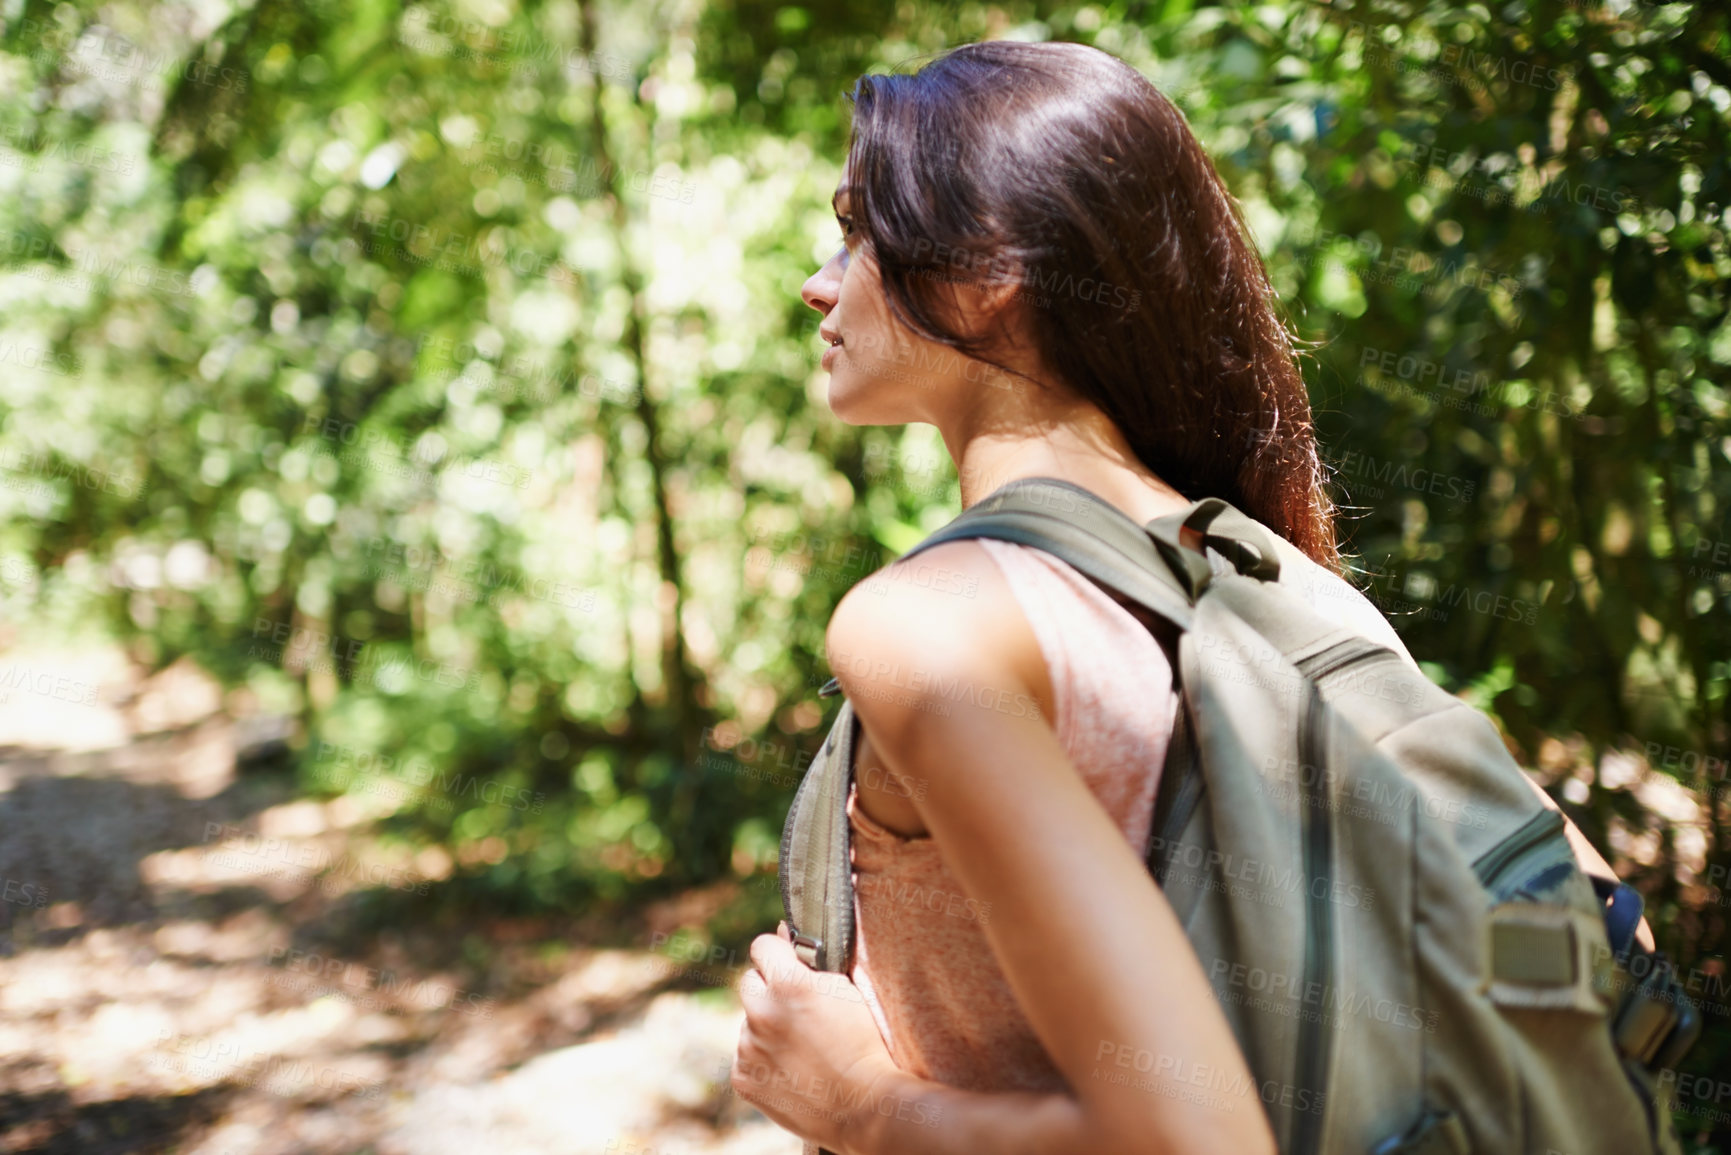 Buy stock photo Hiking, forest or back of woman in nature or wilderness on outdoor trekking adventure alone. Travel, bag or vacation female hiker walking in natural park or woods for exercise or wellness on holiday